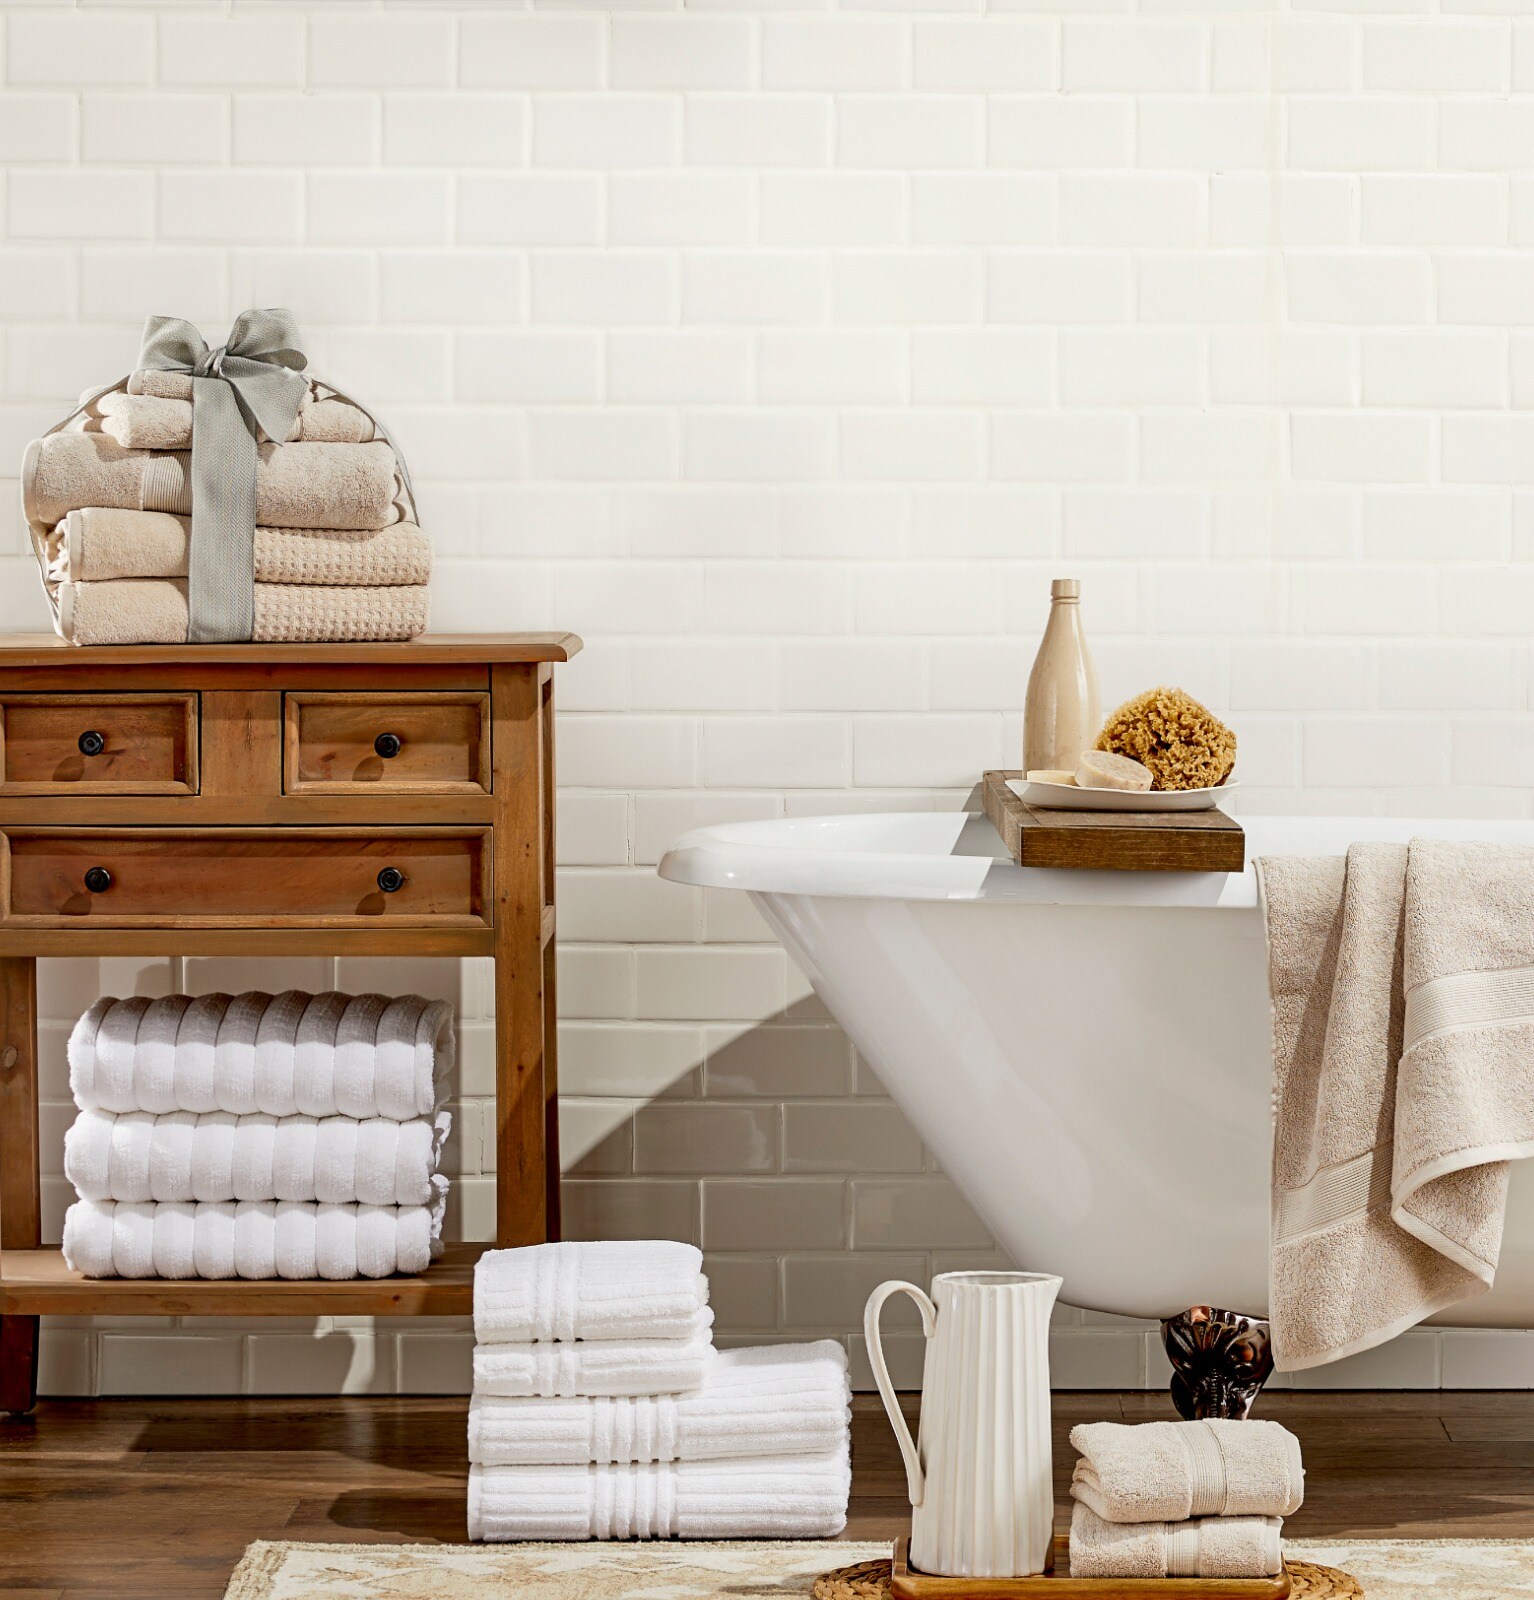 A bathroom with stacks of beige and white towels on a wooden side table next to a stack of towels and a pitcher on the floor, and a clawfoot tub with a wooden bathtub caddie.